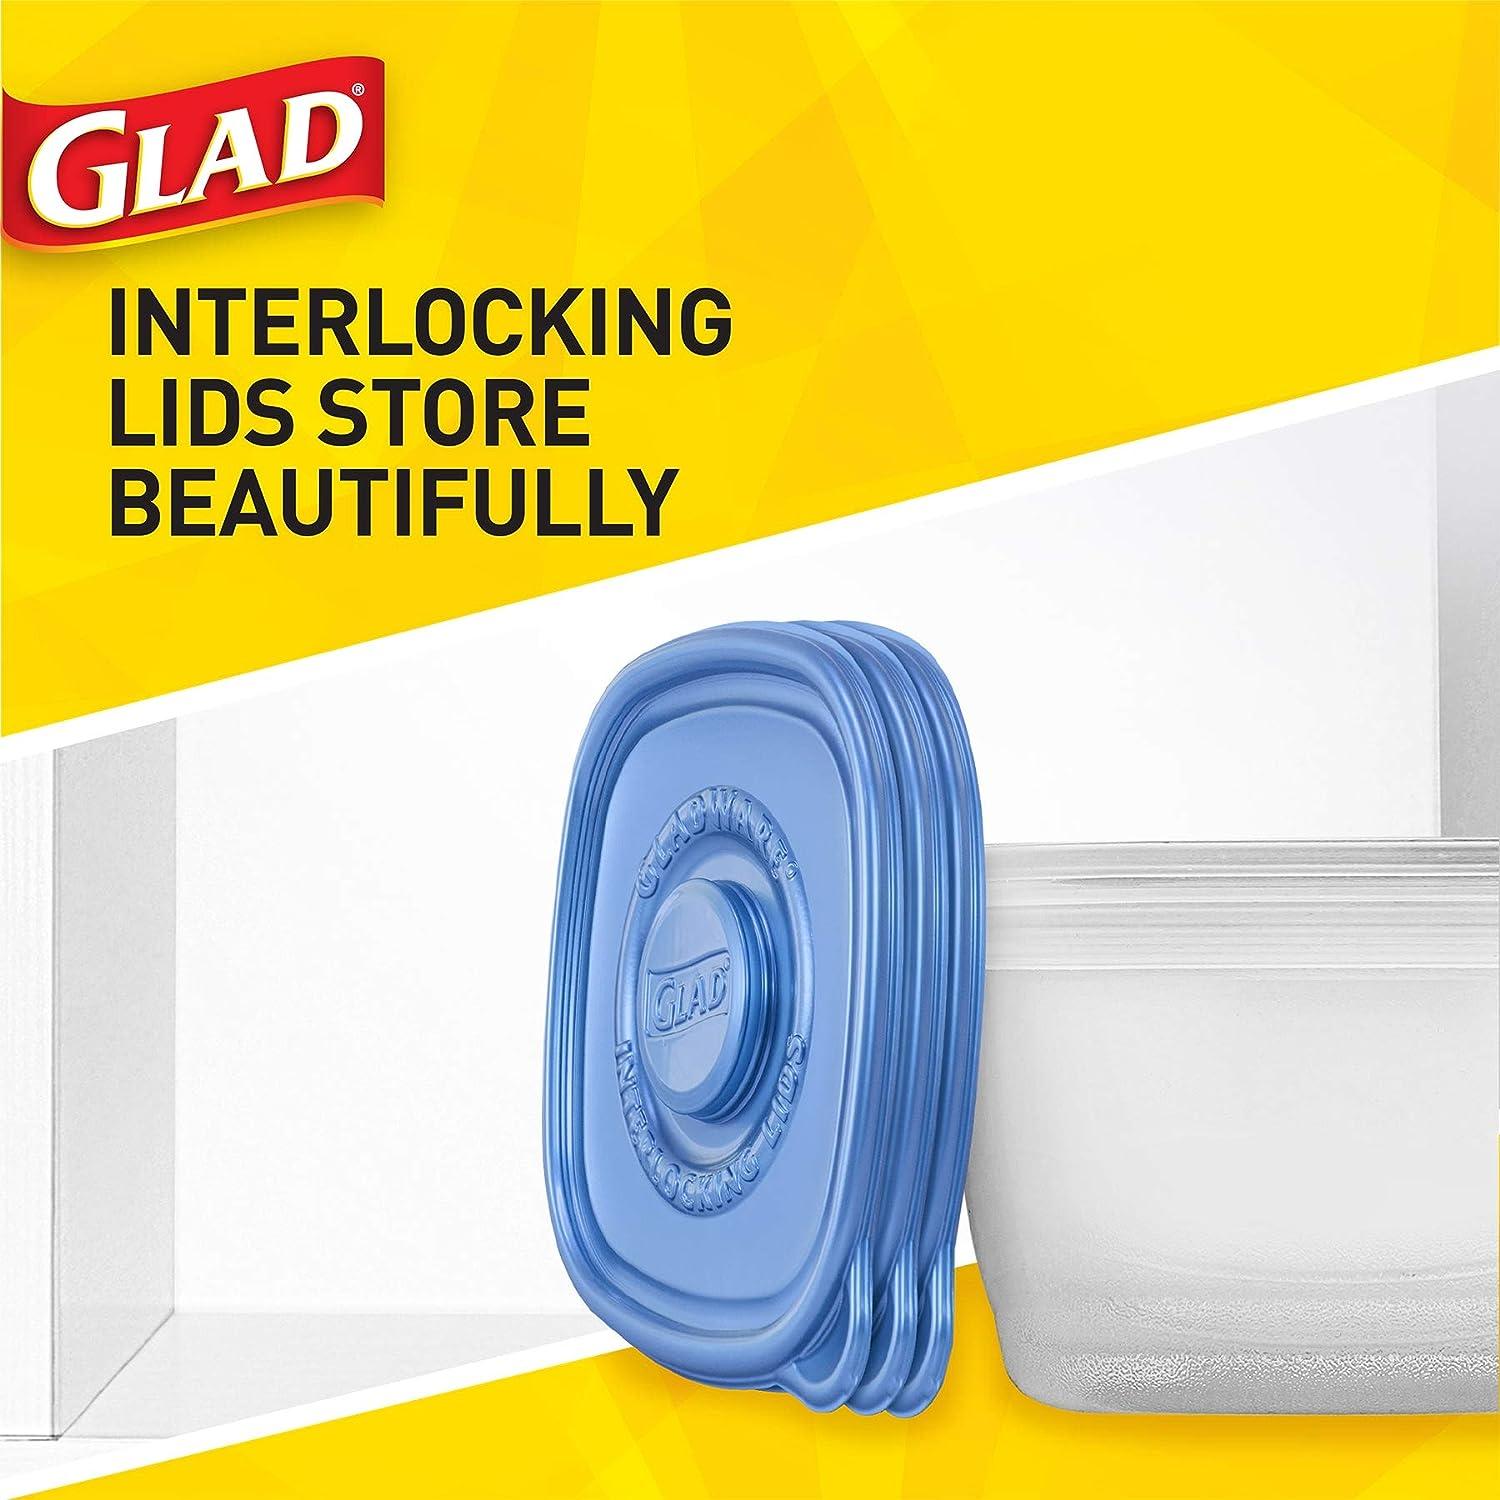 GladWare Entrée Food Storage Containers with Glad Lock Tight Seal | BPA  Free | Medium Square Plastic Containers Hold Up to 25 Ounces of Food, 5  Count